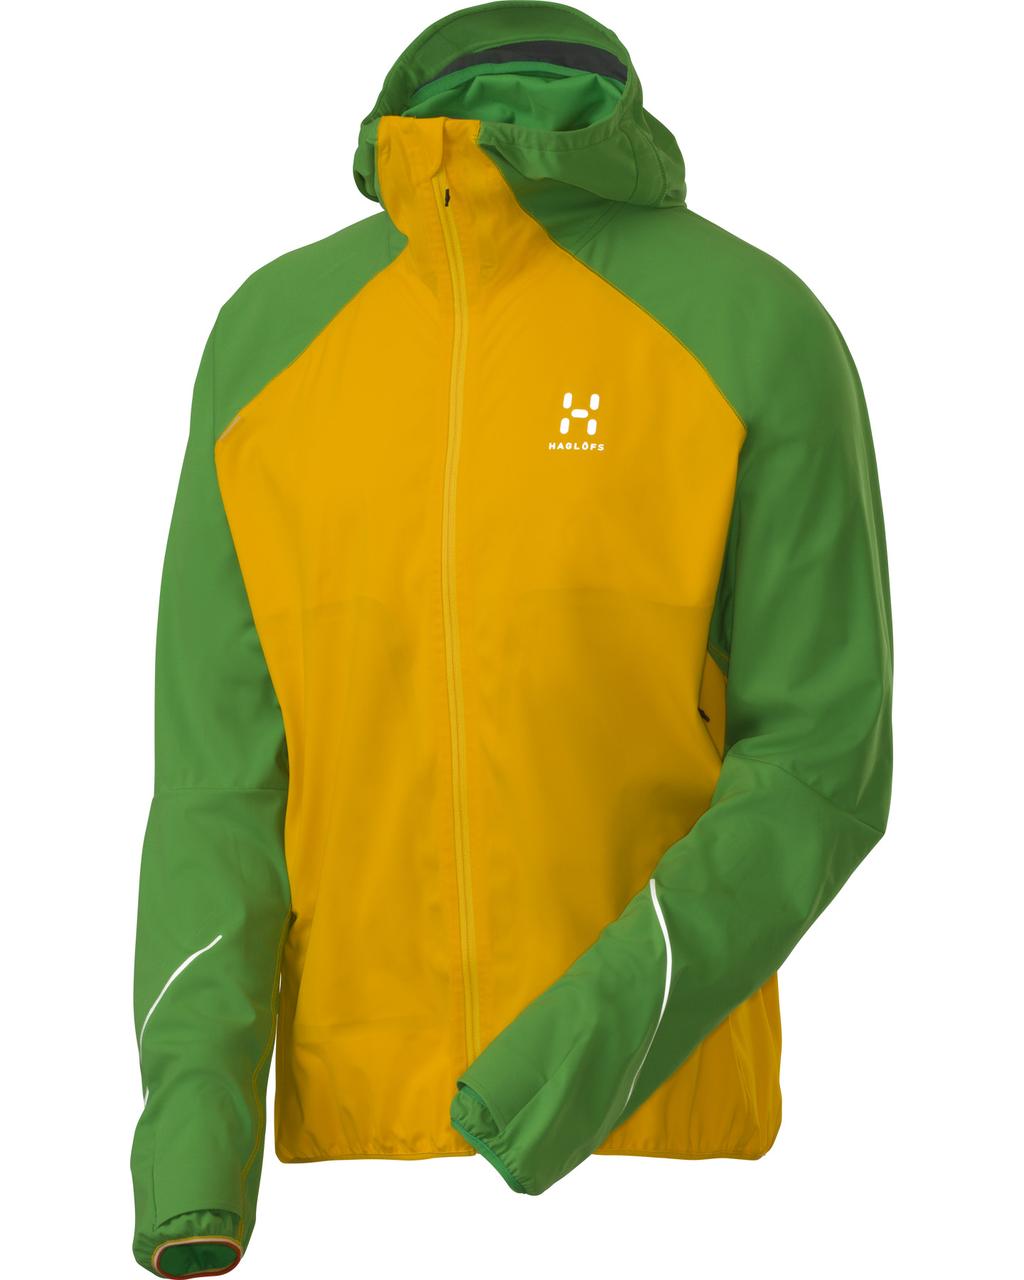 L.I.M FLEX HOOD/ L.I.M Q FLEX HOOD The L.I.M Flex Jacket is Haglöfs lightest, most packable and flexible soft shell that on top of it all has been classified a bluesign garment.